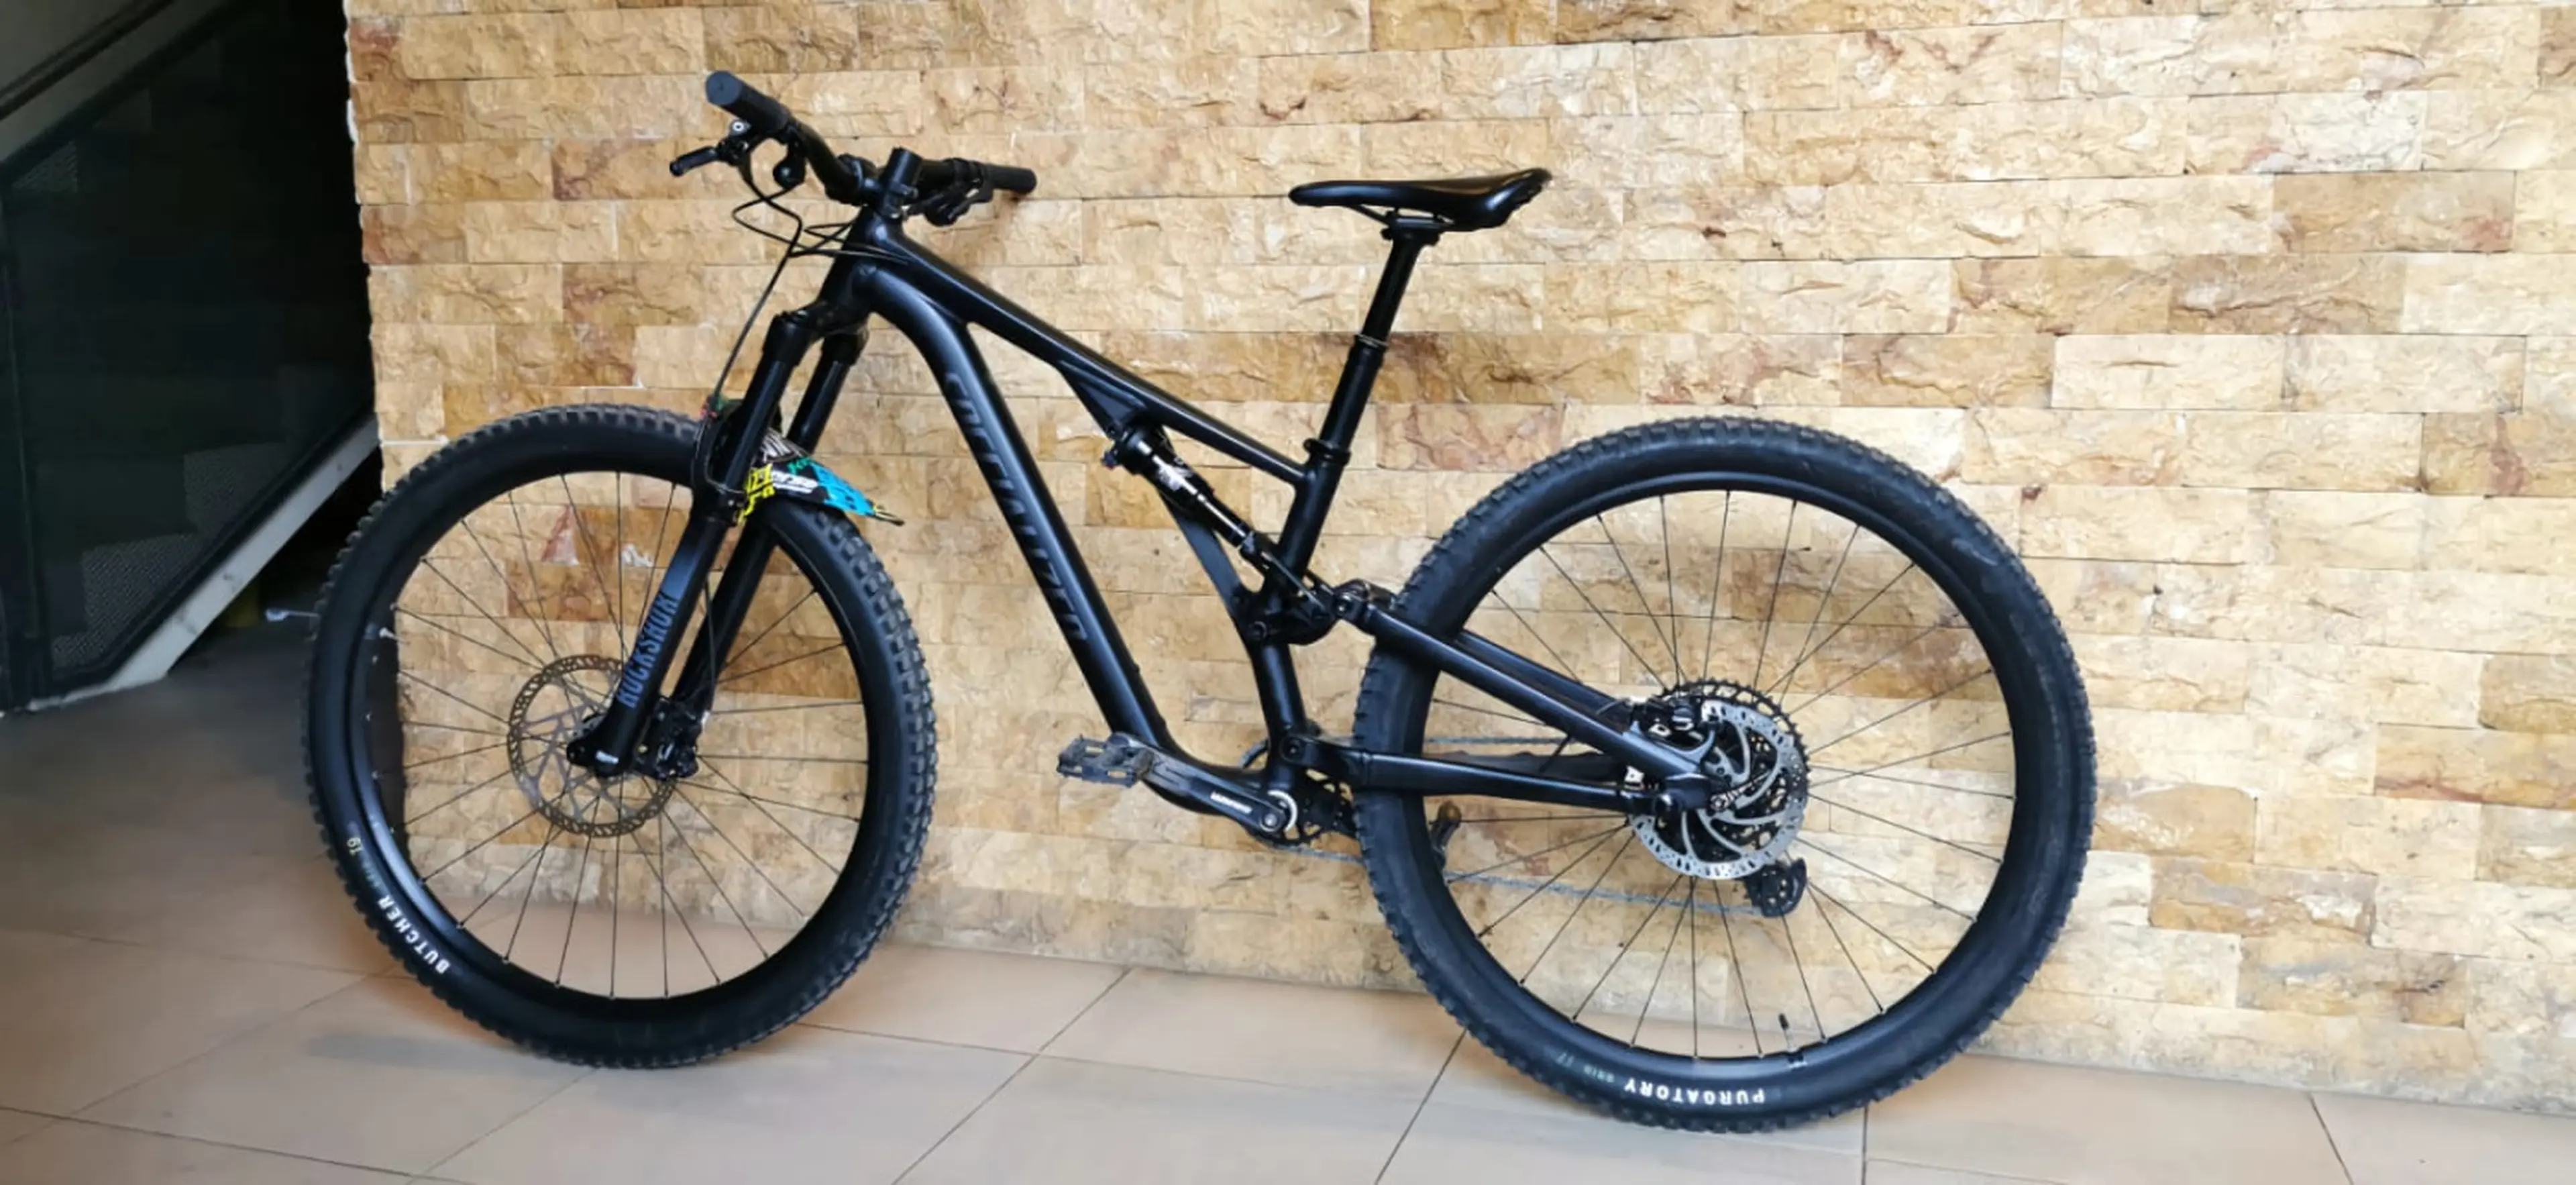 4. Specialized stumpjumper alloy